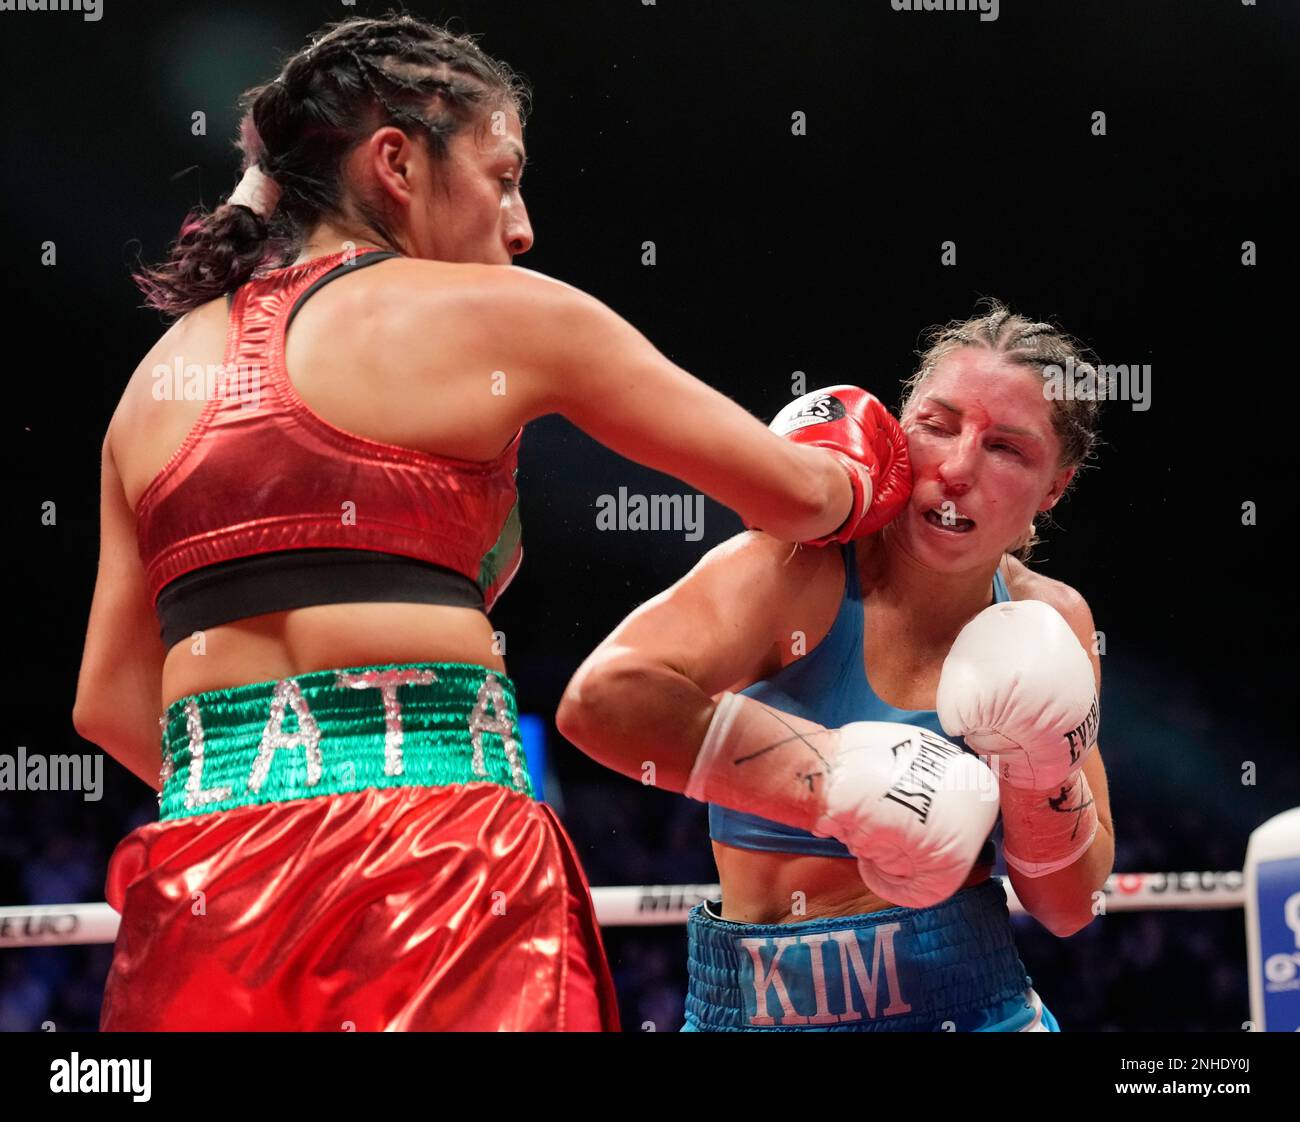 Kim Clavel, right, of Canada, and Jessica Nery Plata, from Mexico, trade punches during the WBC/WBA junior flyweight title boxing bout Friday, Jan